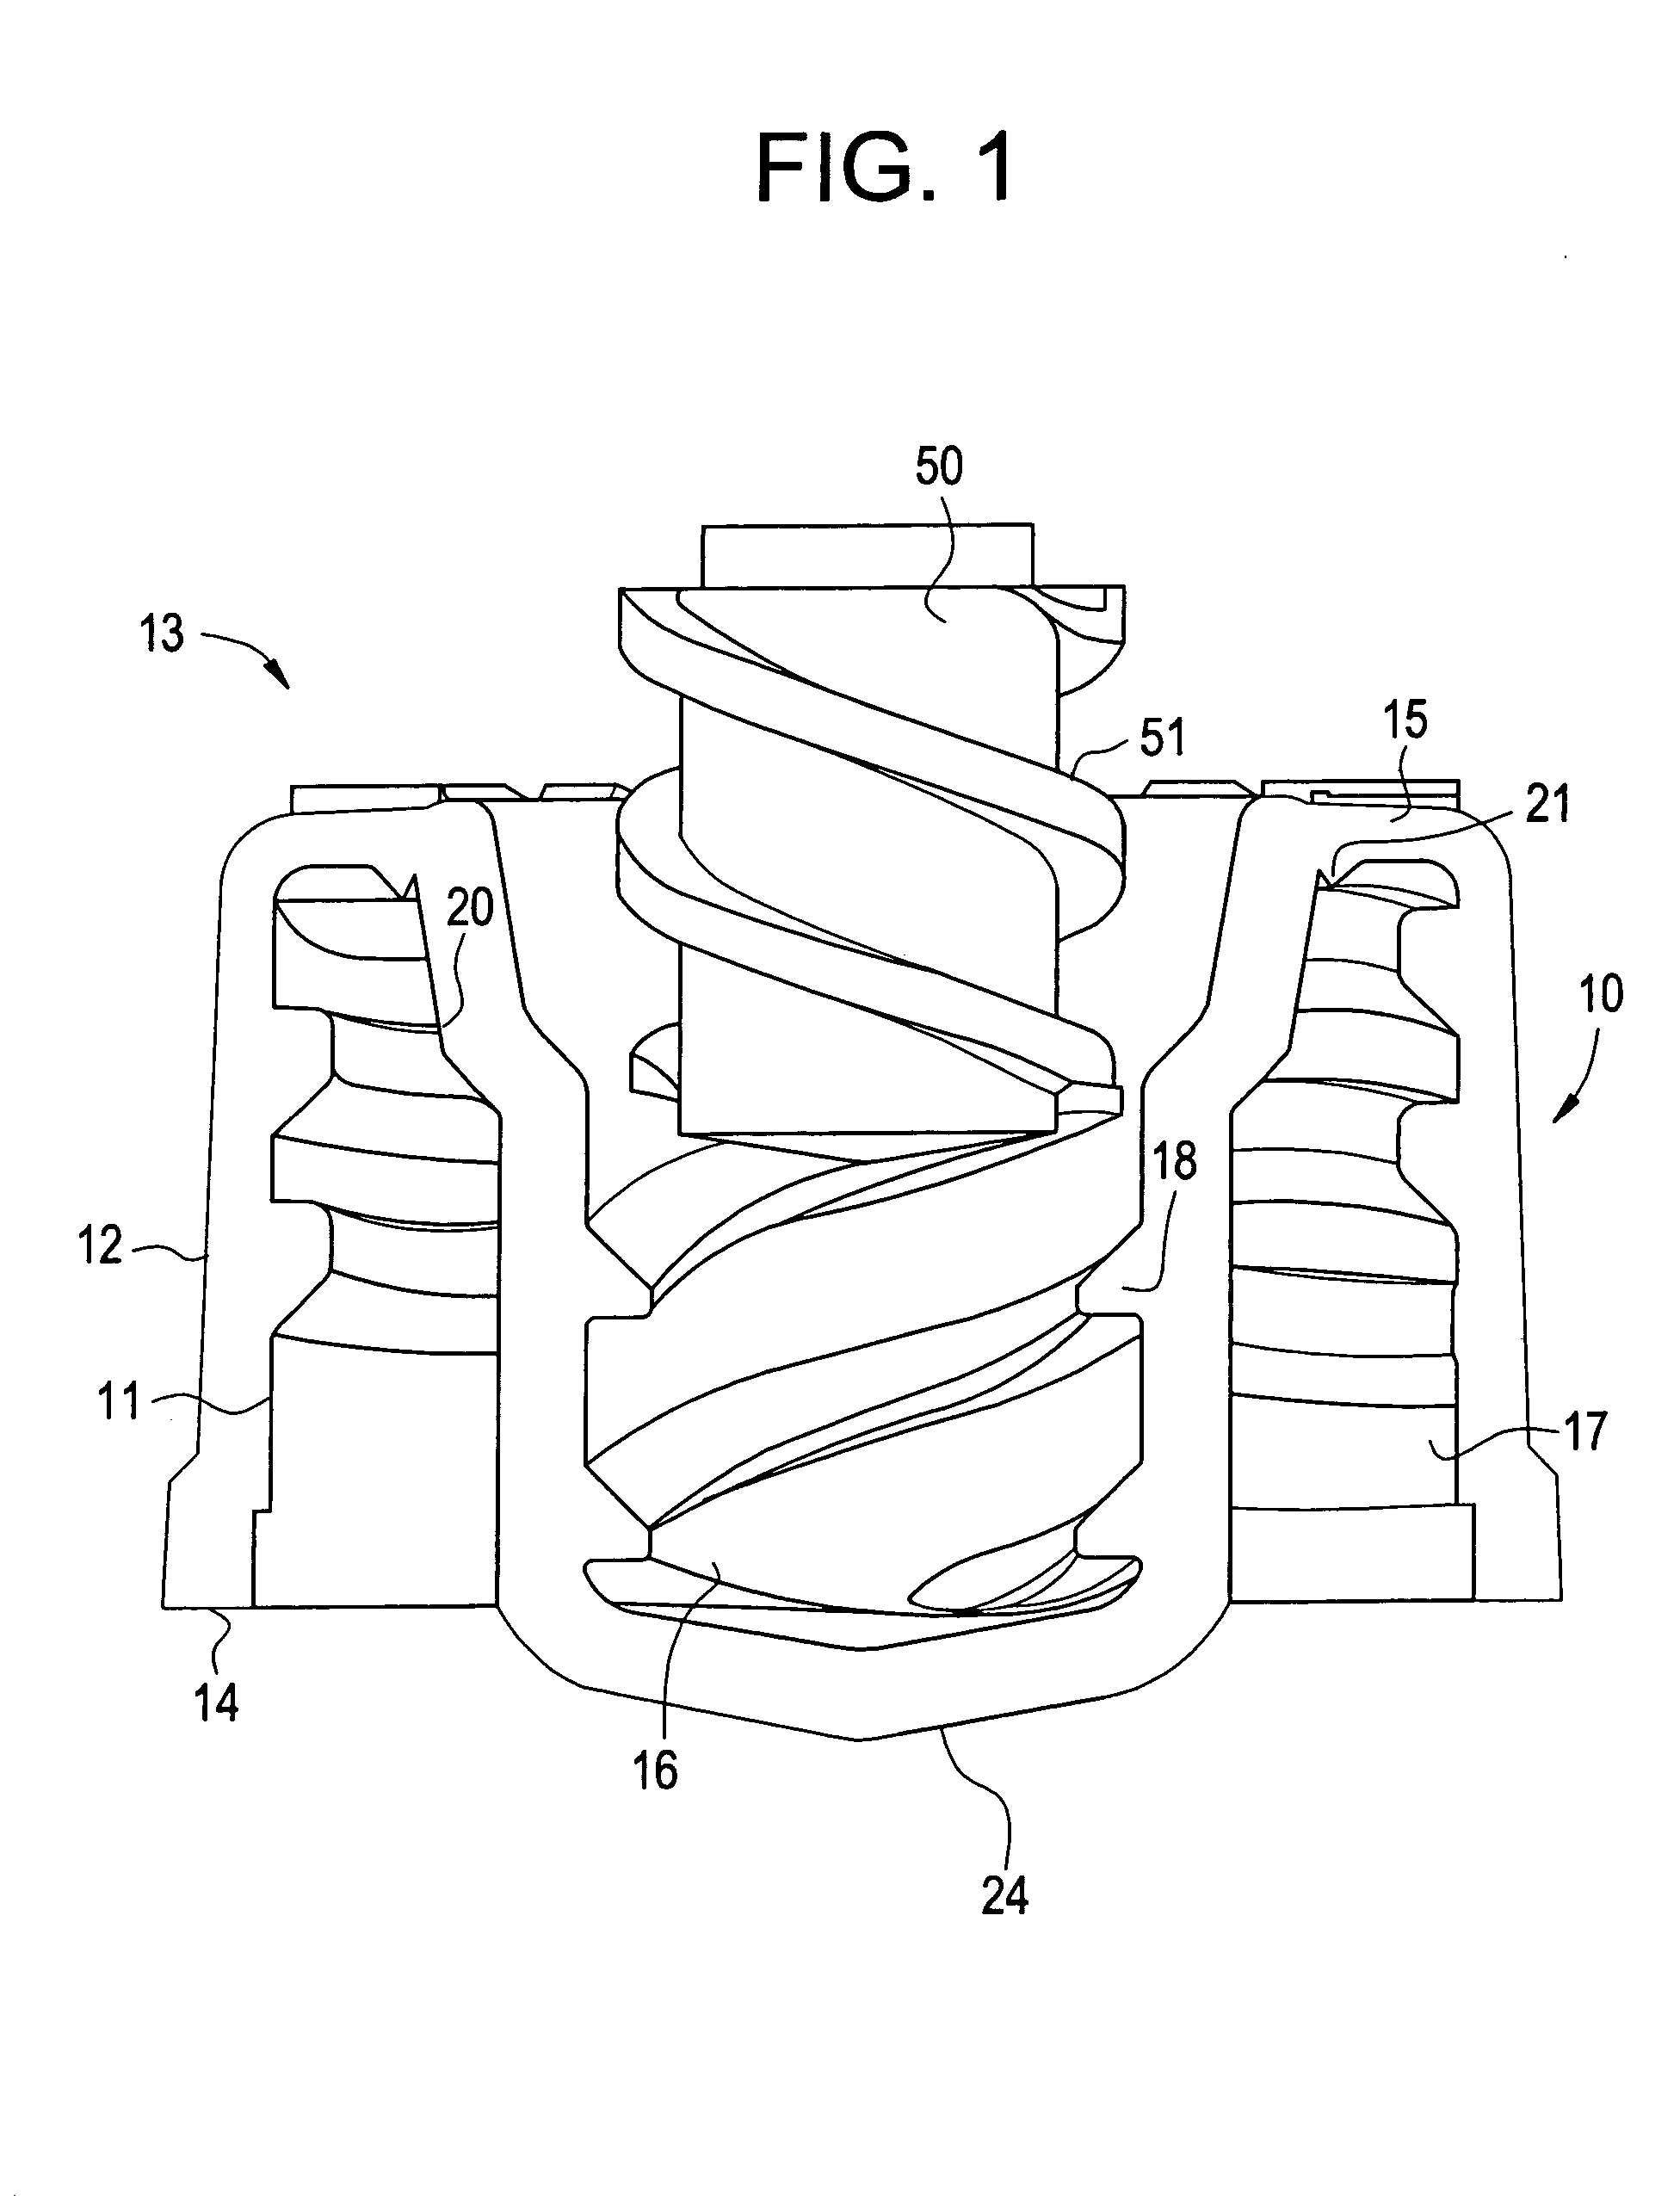 Container closure and device to install and remove closure